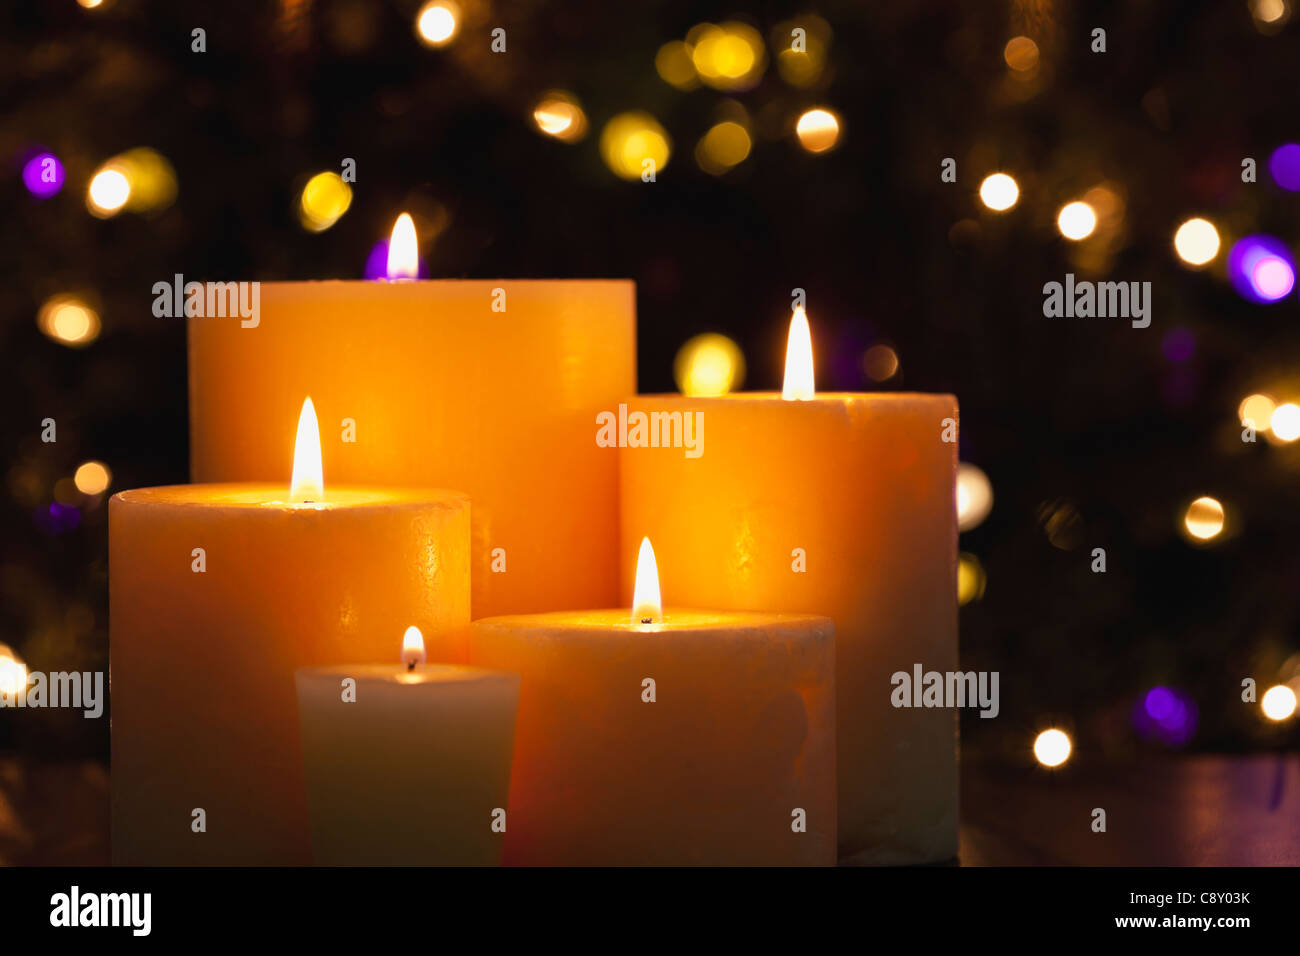 USA, Illinois, Metamora, Close up of burning candles and Christmas lights in background Stock Photo